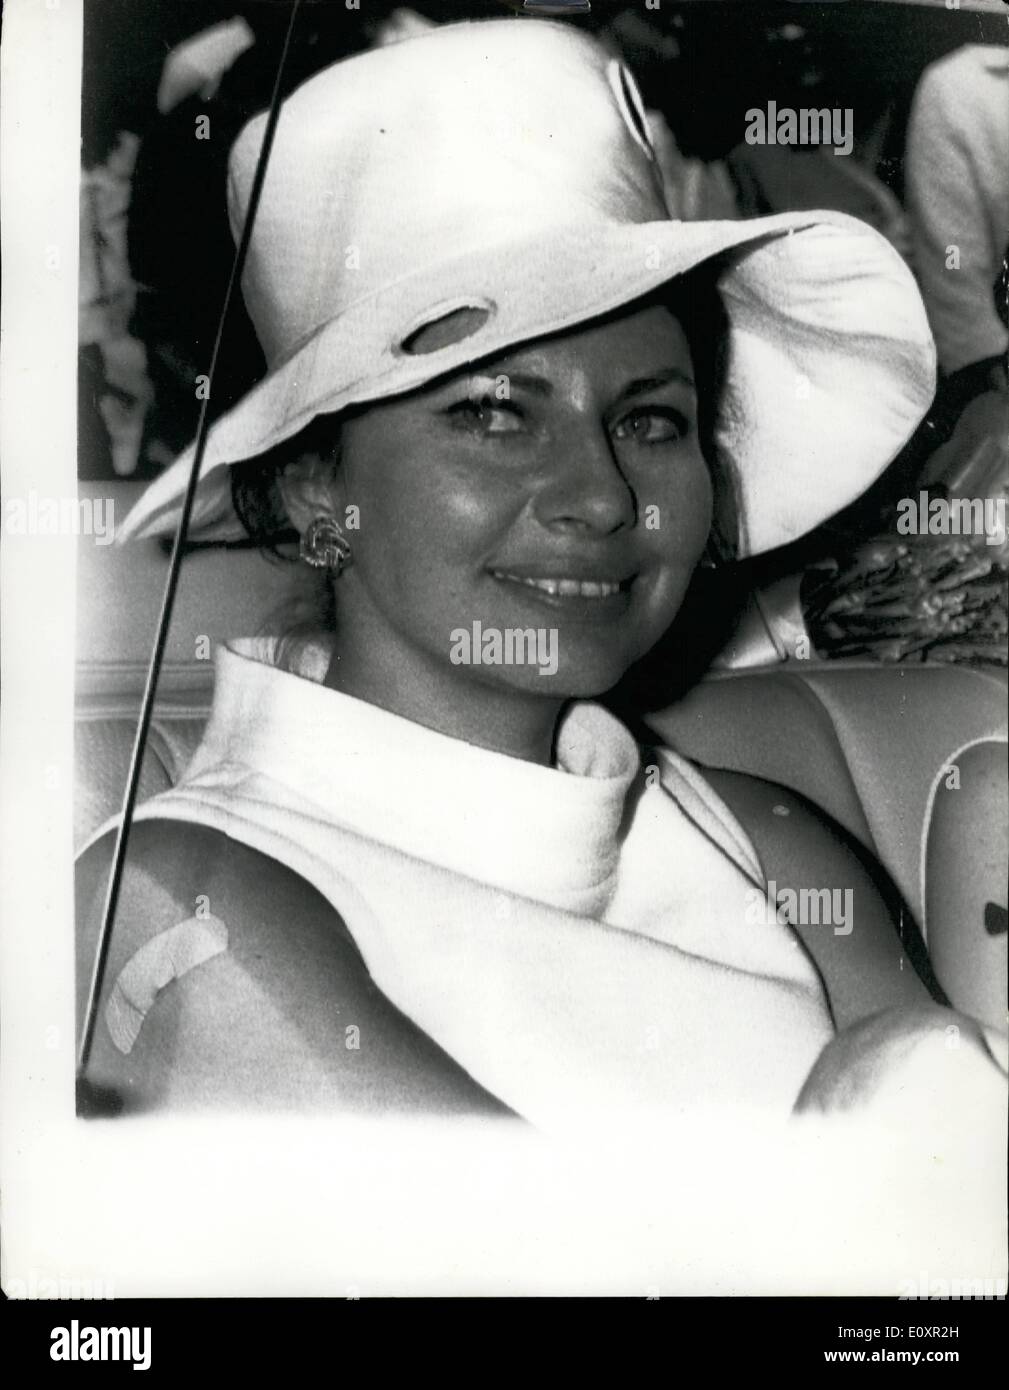 Oct. 10, 1967 - Princess Soraya in Arguement at Sydney airport- Princess Soraya , former wife of the shah of Iran, argued for two hours at sydney Airport today with quarantine officials before she agreed to have a cholera injection . Princess Soraya had flown in from bangkok a cholera area, and her medical papers showed no record of a recent injection . The 34 year old princess was near tears as she left the quarantine room with a plaster on her arm. She is in Australia for a 10day visit to raise money for a children's medical research foundation Stock Photo